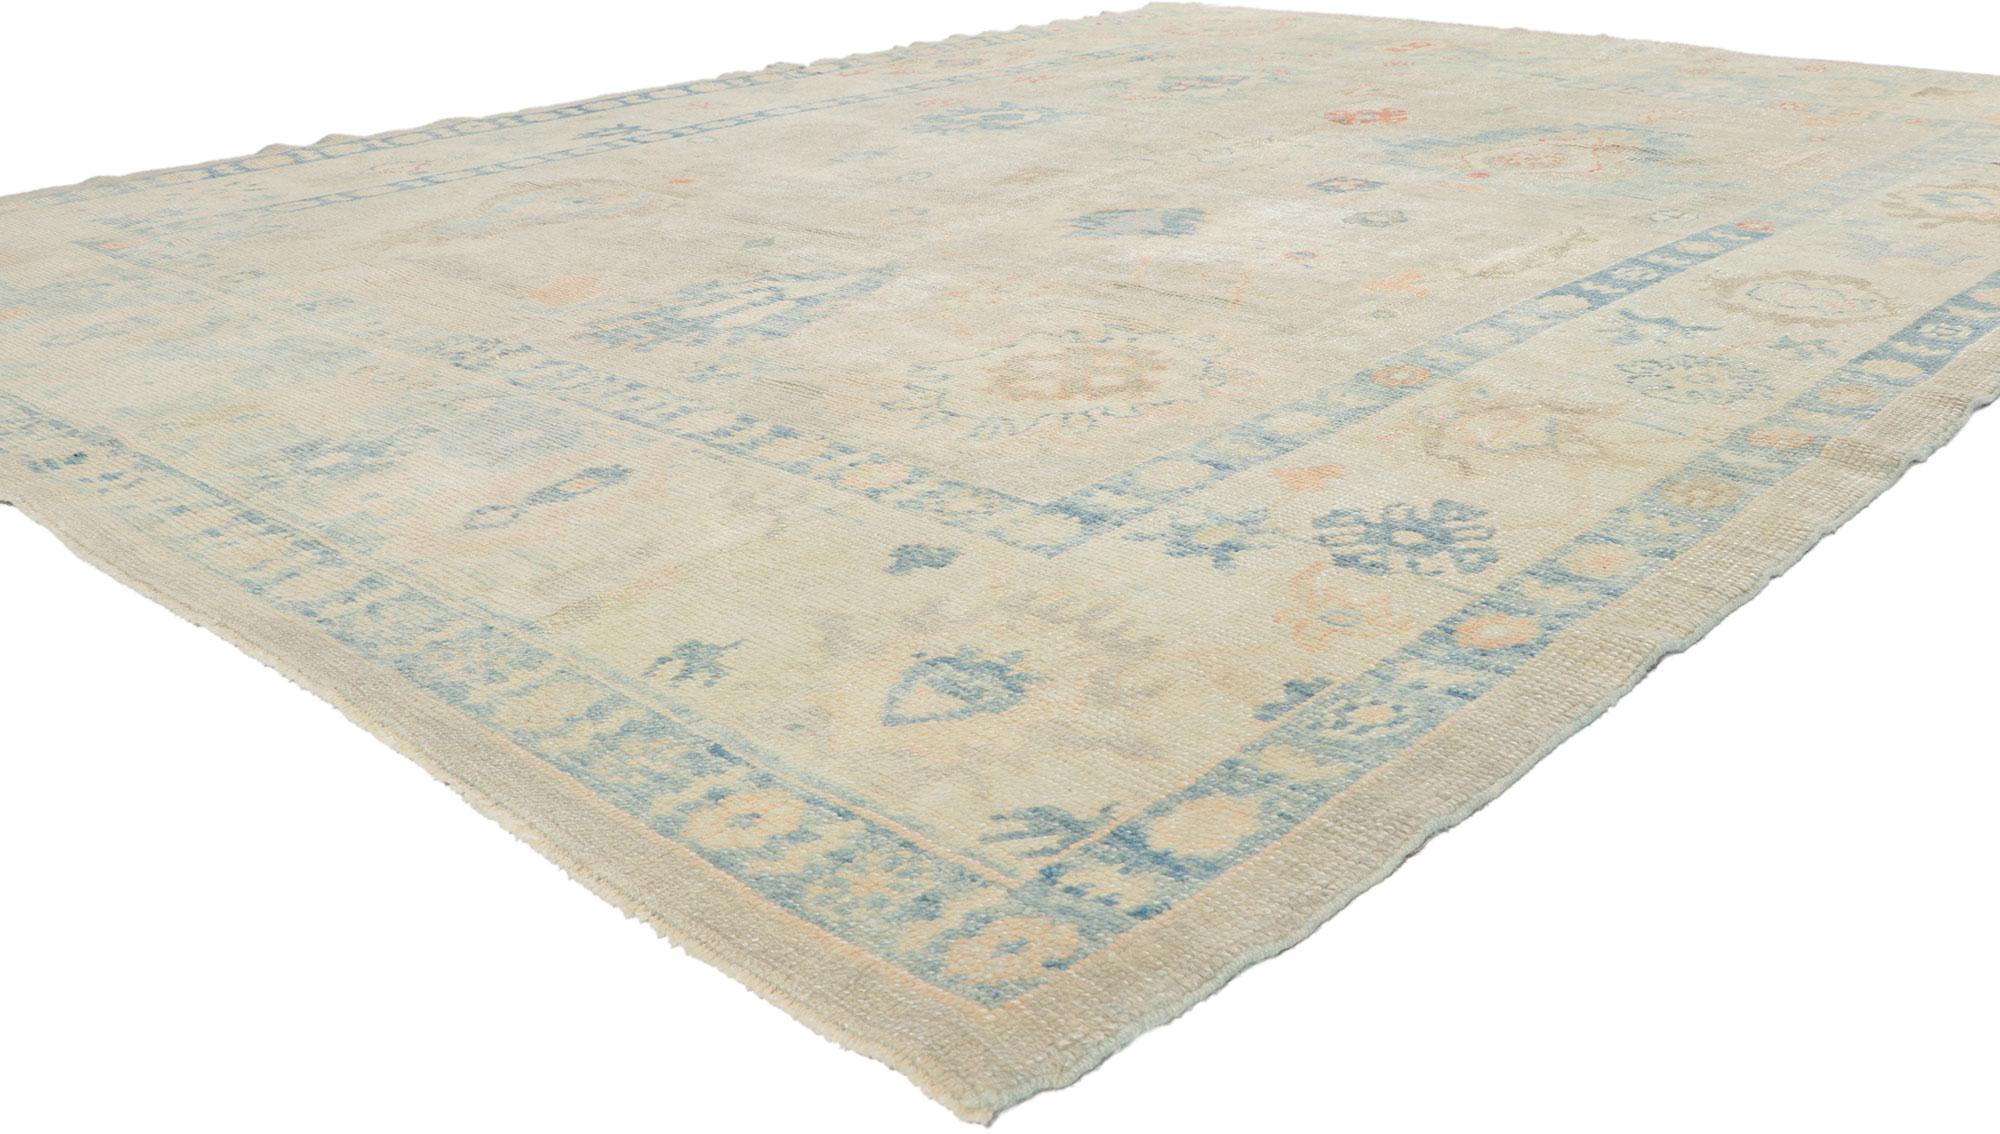 53802 new Turkish Oushak rug with Modern style 08'04 x 11'01. Polished and playful, this hand-knotted wool contemporary Turkish Oushak rug beautifully embodies a modern style. The abrashed field features an array of Harshang motifs, leafy tendrils,